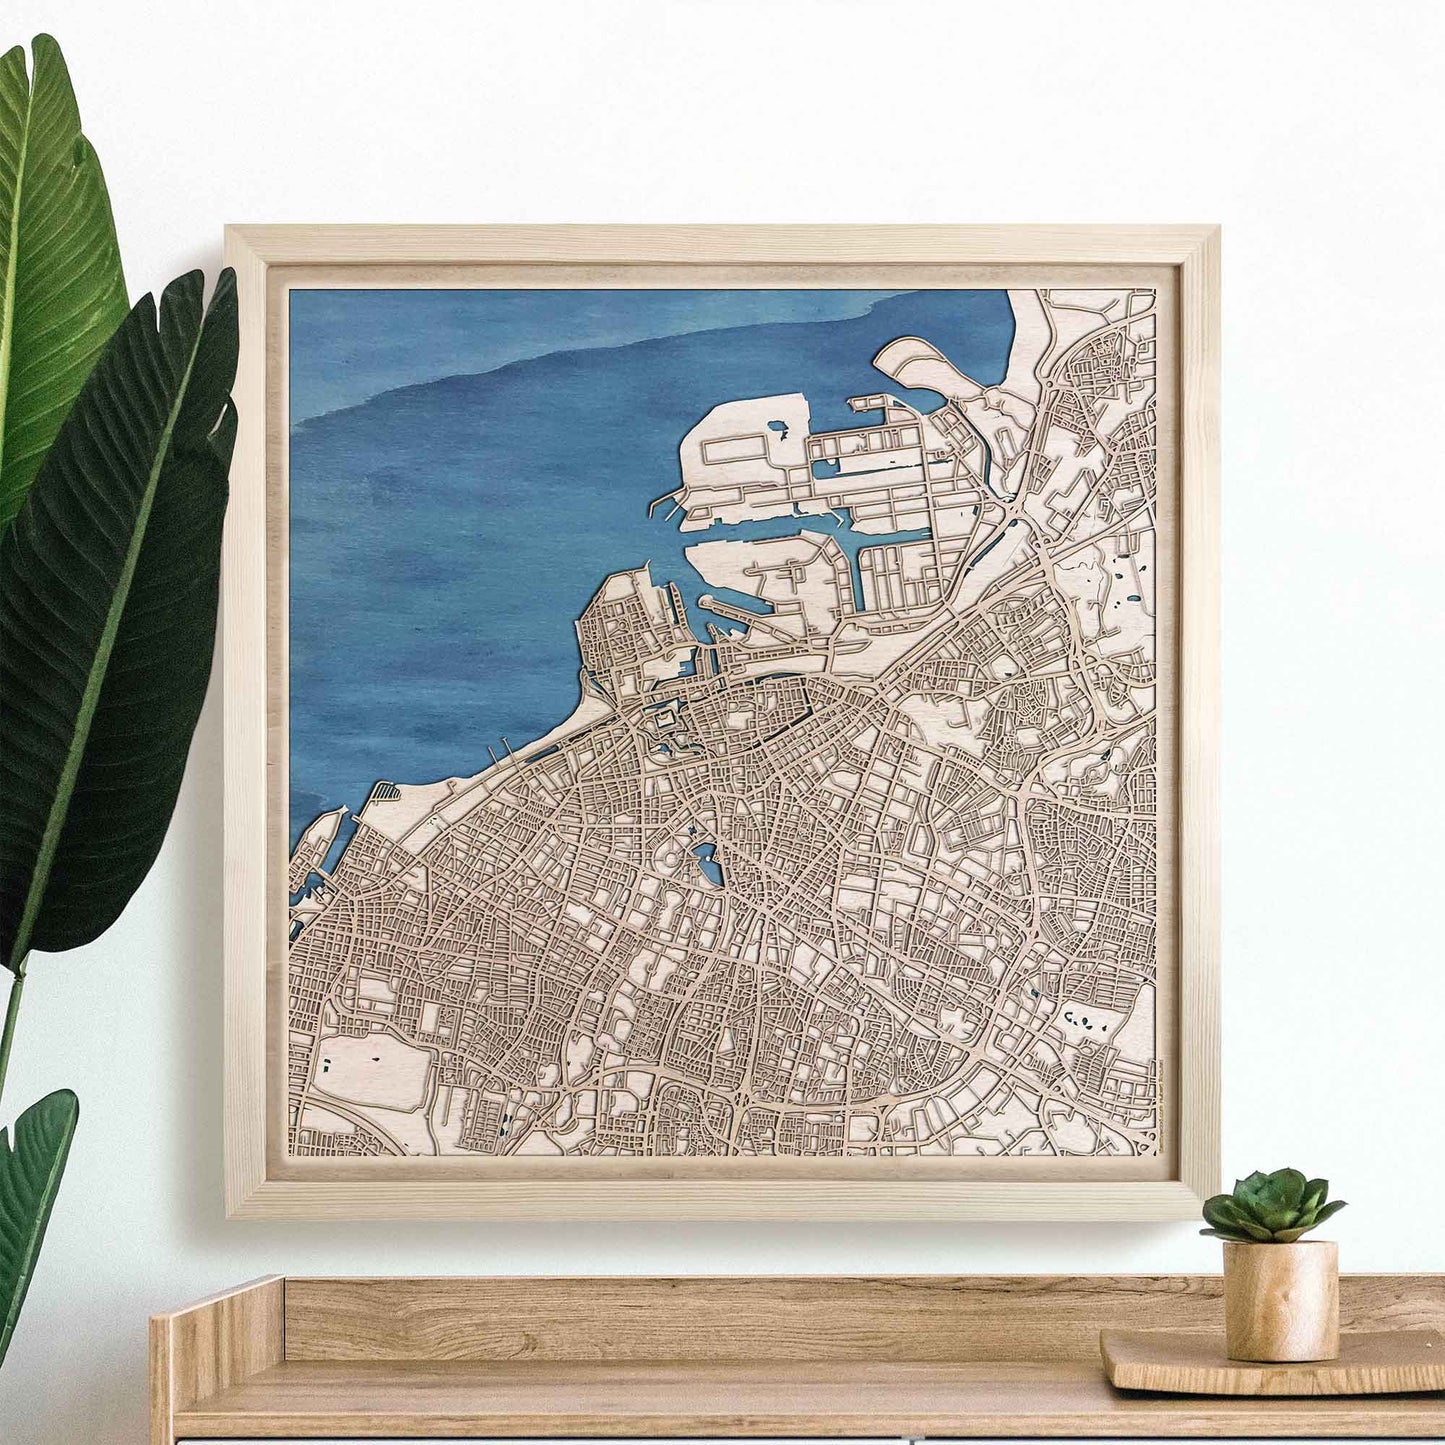 Malmo Wooden Map by CityWood - Custom Wood Map Art - Unique Laser Cut Engraved - Anniversary Gift